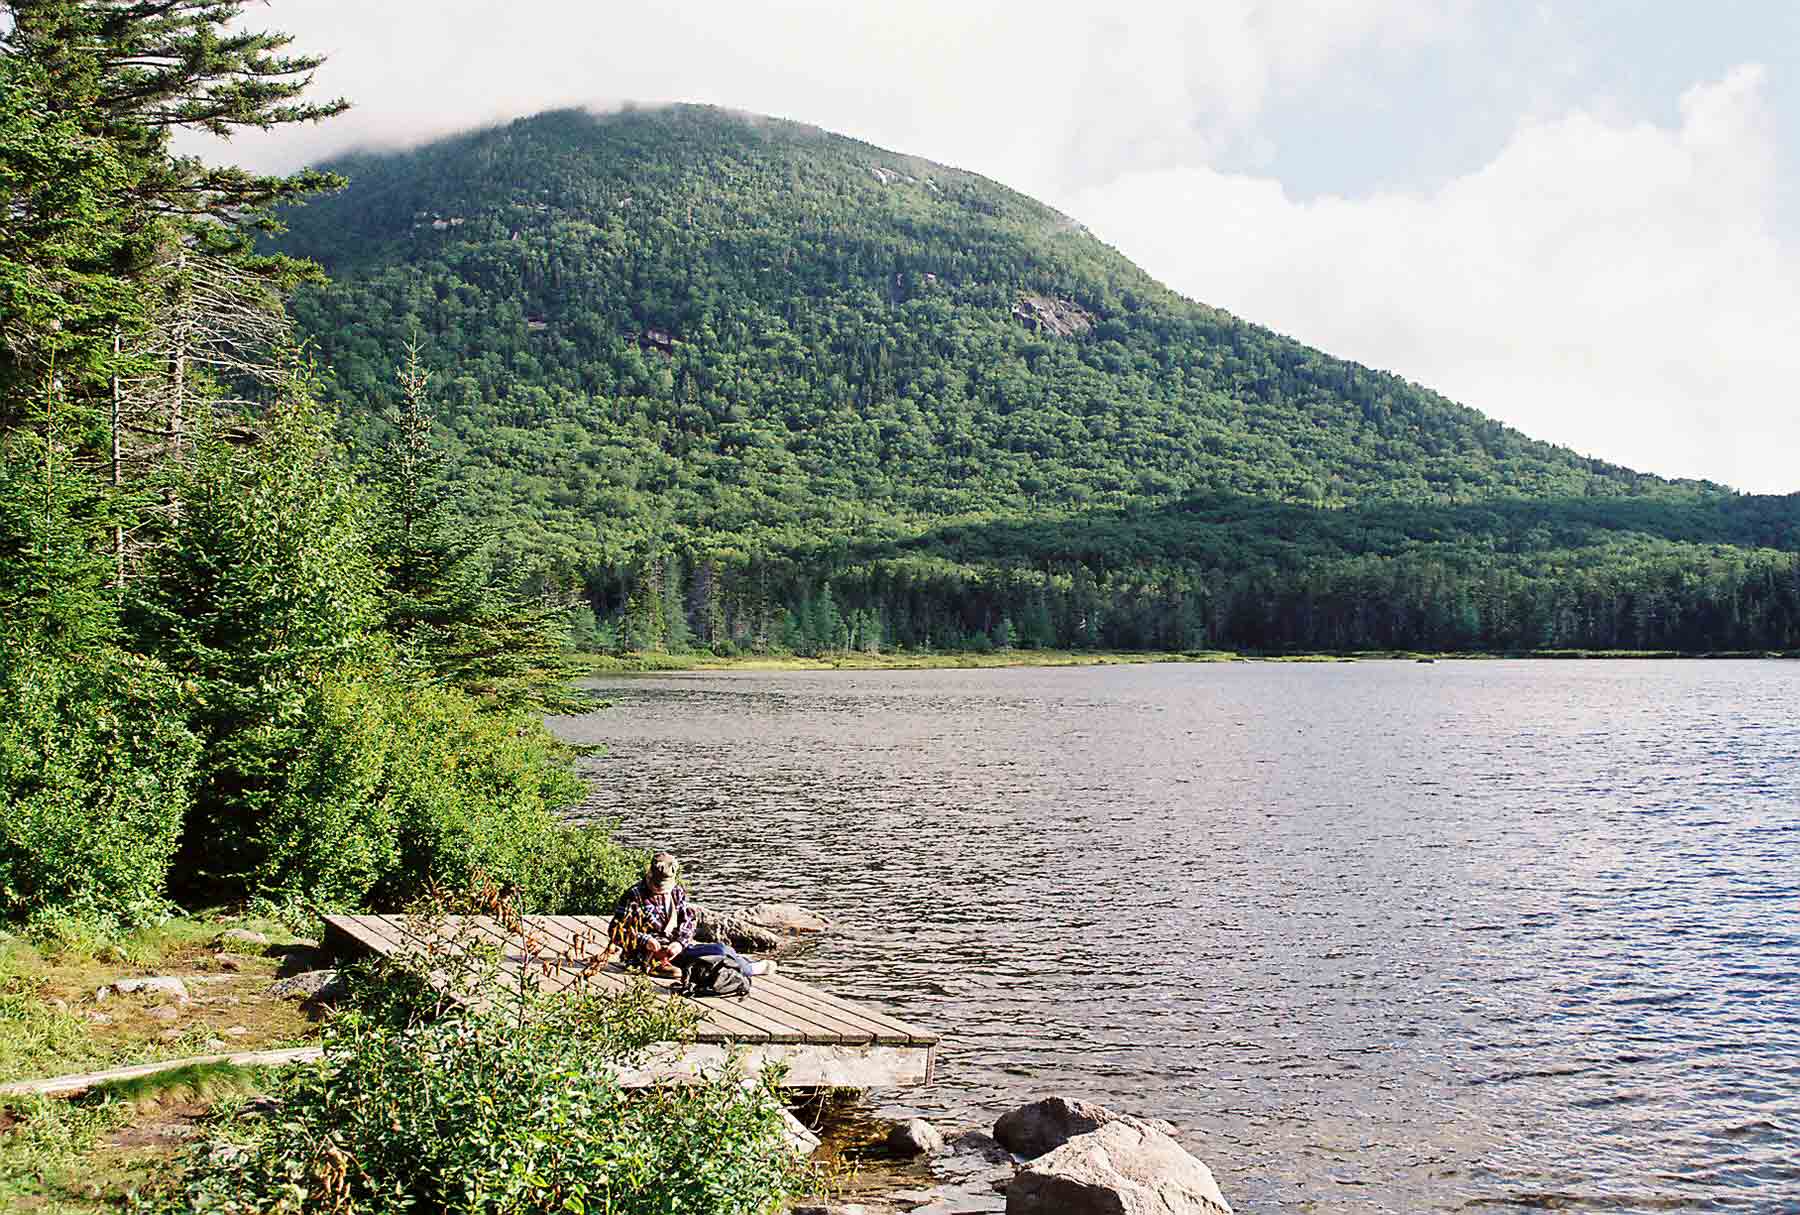 View of Cannon Mt. from Lonesome Lake.  Dock is for Lonesome Lake Hut.  Courtesy dlcul@conncoll.edu